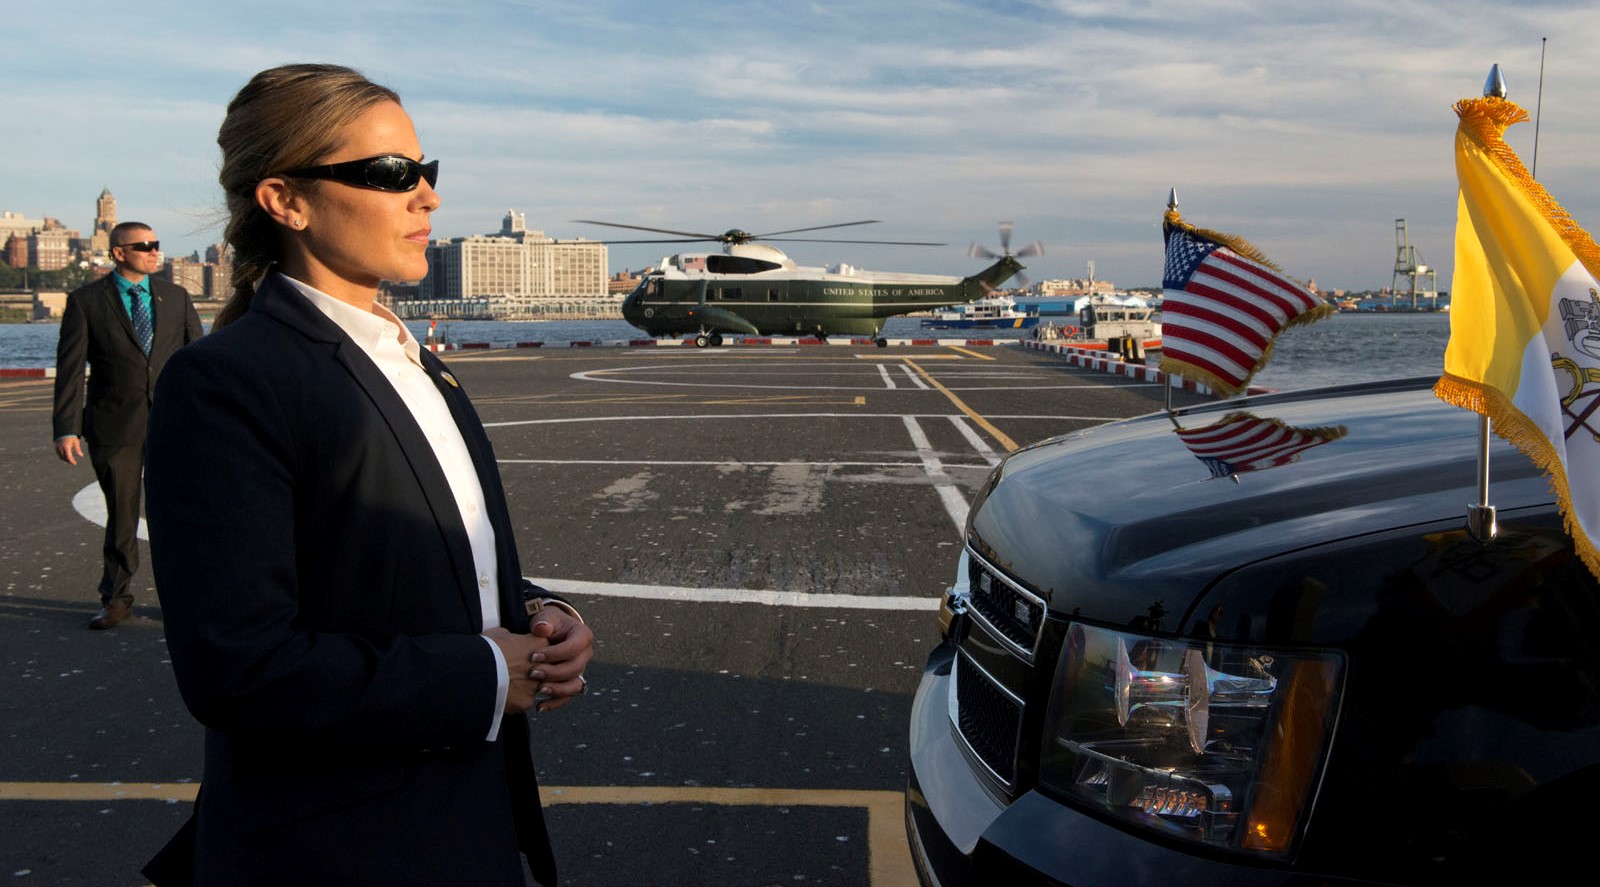 Protecting America's senior leaders is a zero fail mission for members of the U.S. Secret Service.